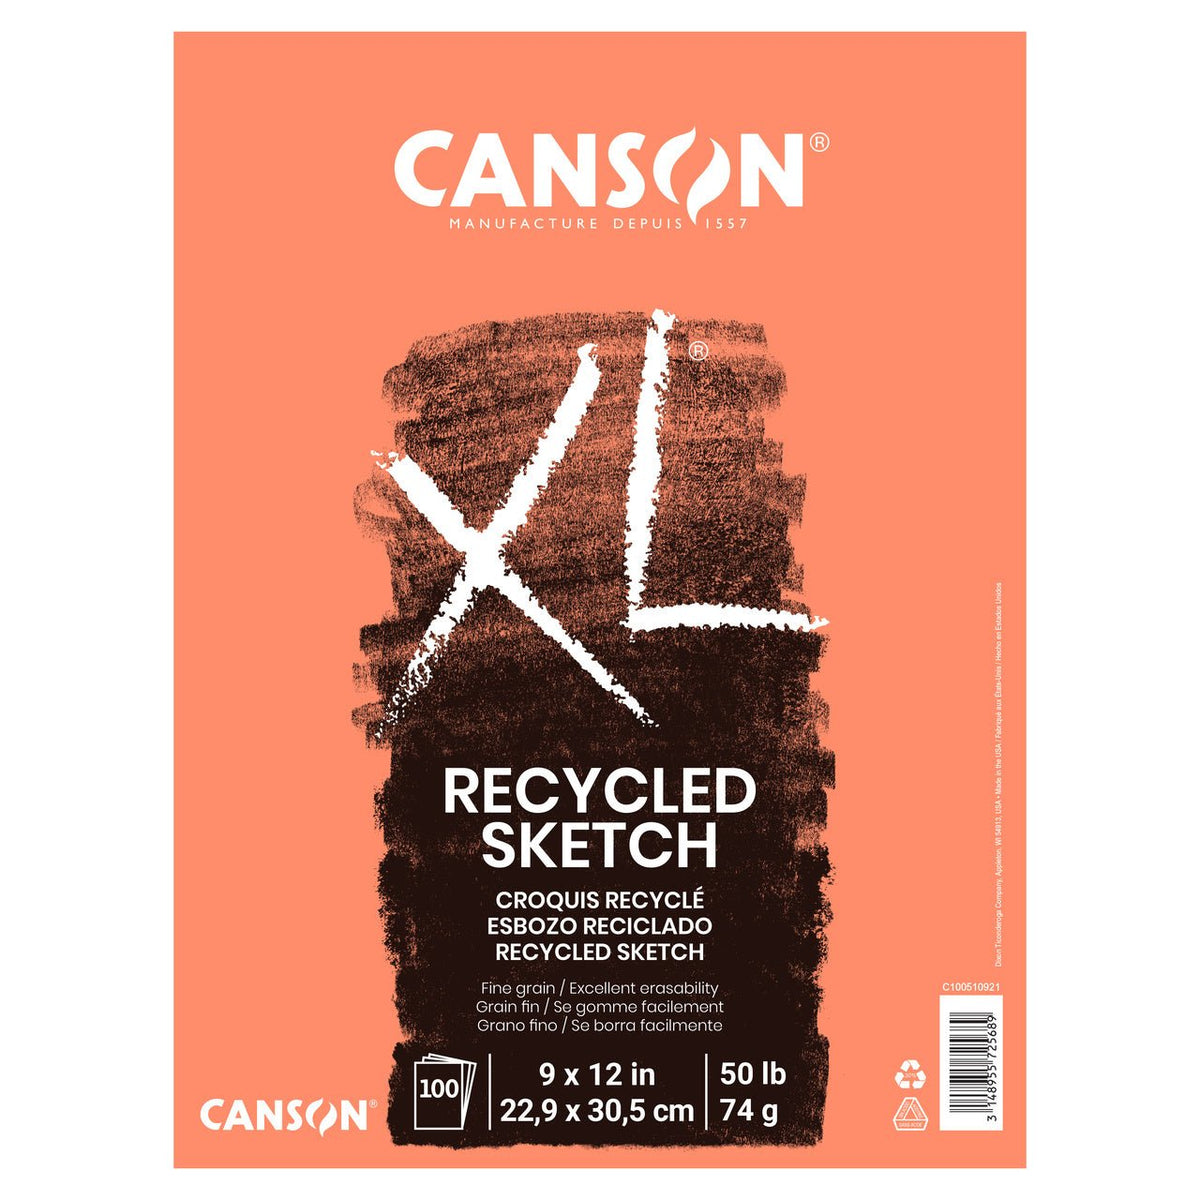 Canson XL Recycled Tape-bound Sketch Pad 9X12 - merriartist.com